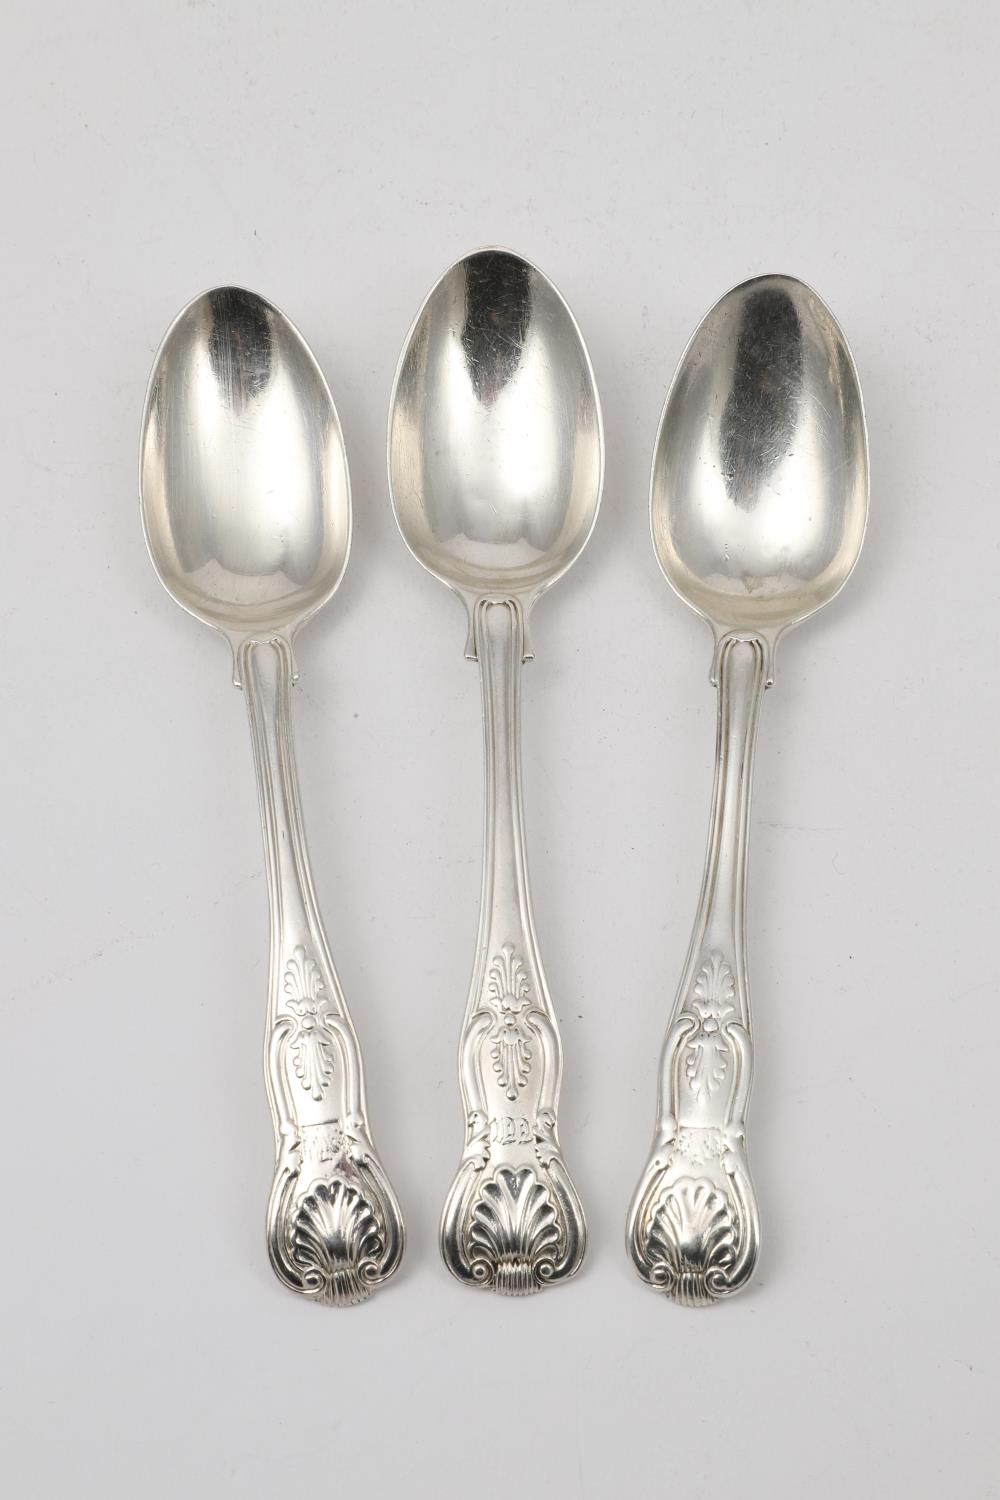 MIXED KING'S PATTERN FLATWARE:-. - Image 8 of 15